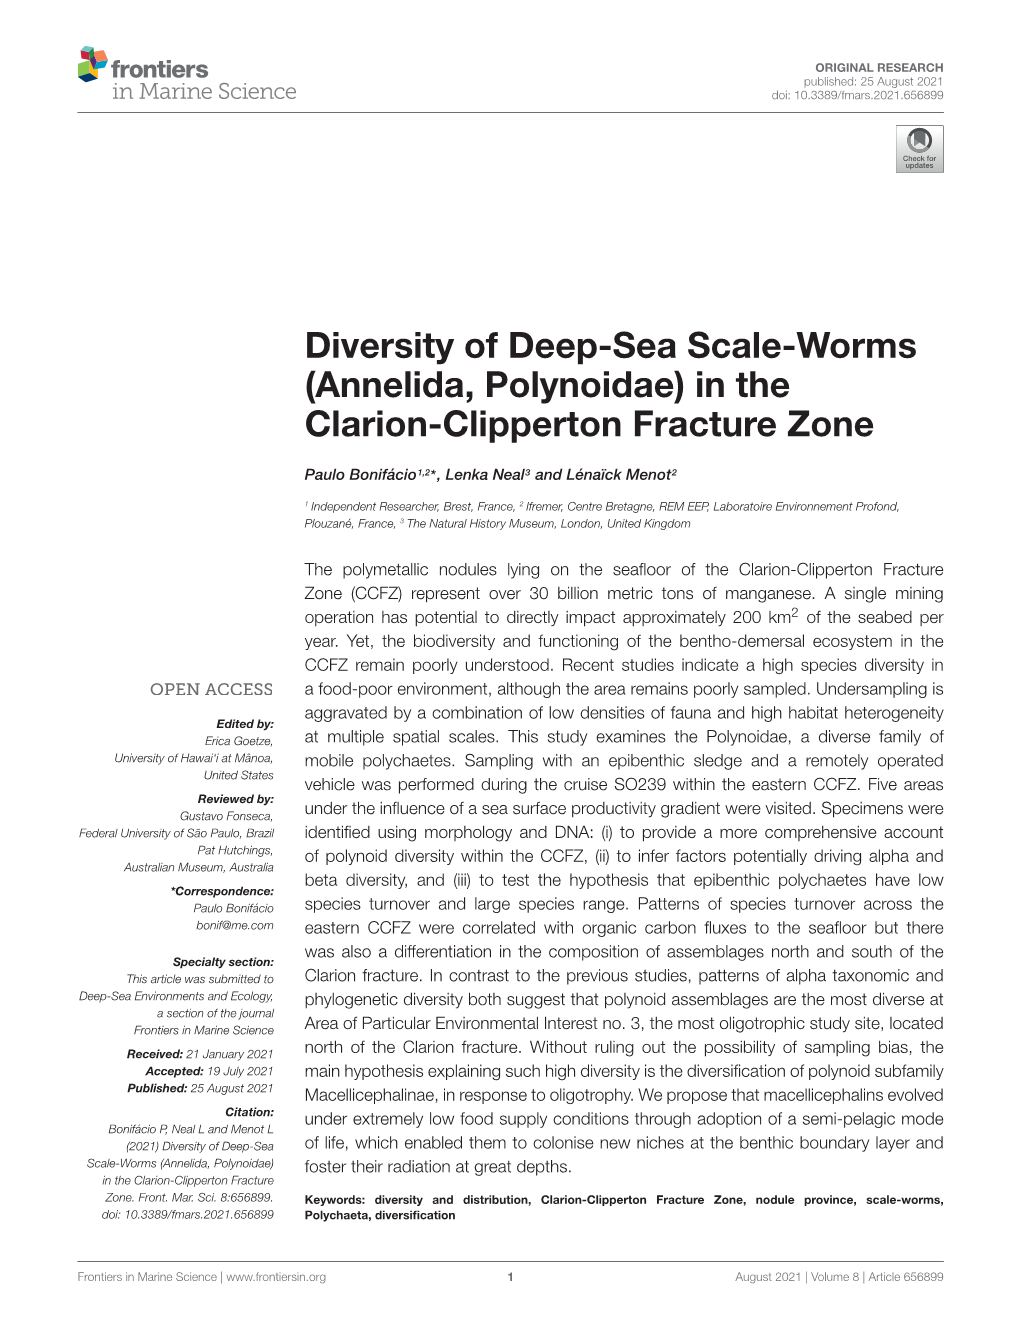 Diversity of Deep-Sea Scale-Worms (Annelida, Polynoidae) in the Clarion-Clipperton Fracture Zone